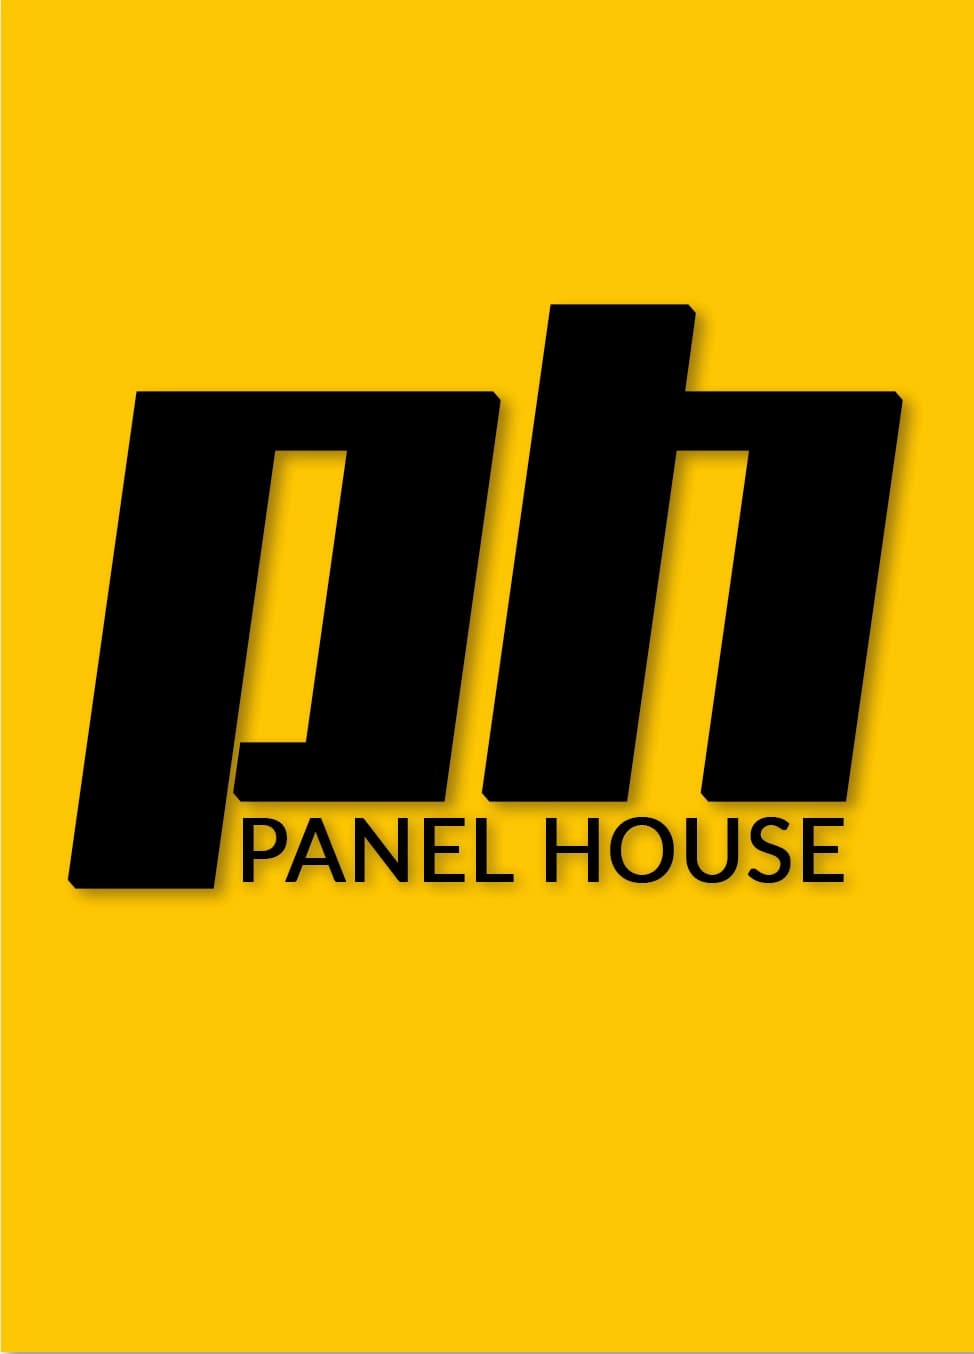 Business logo of Panel House